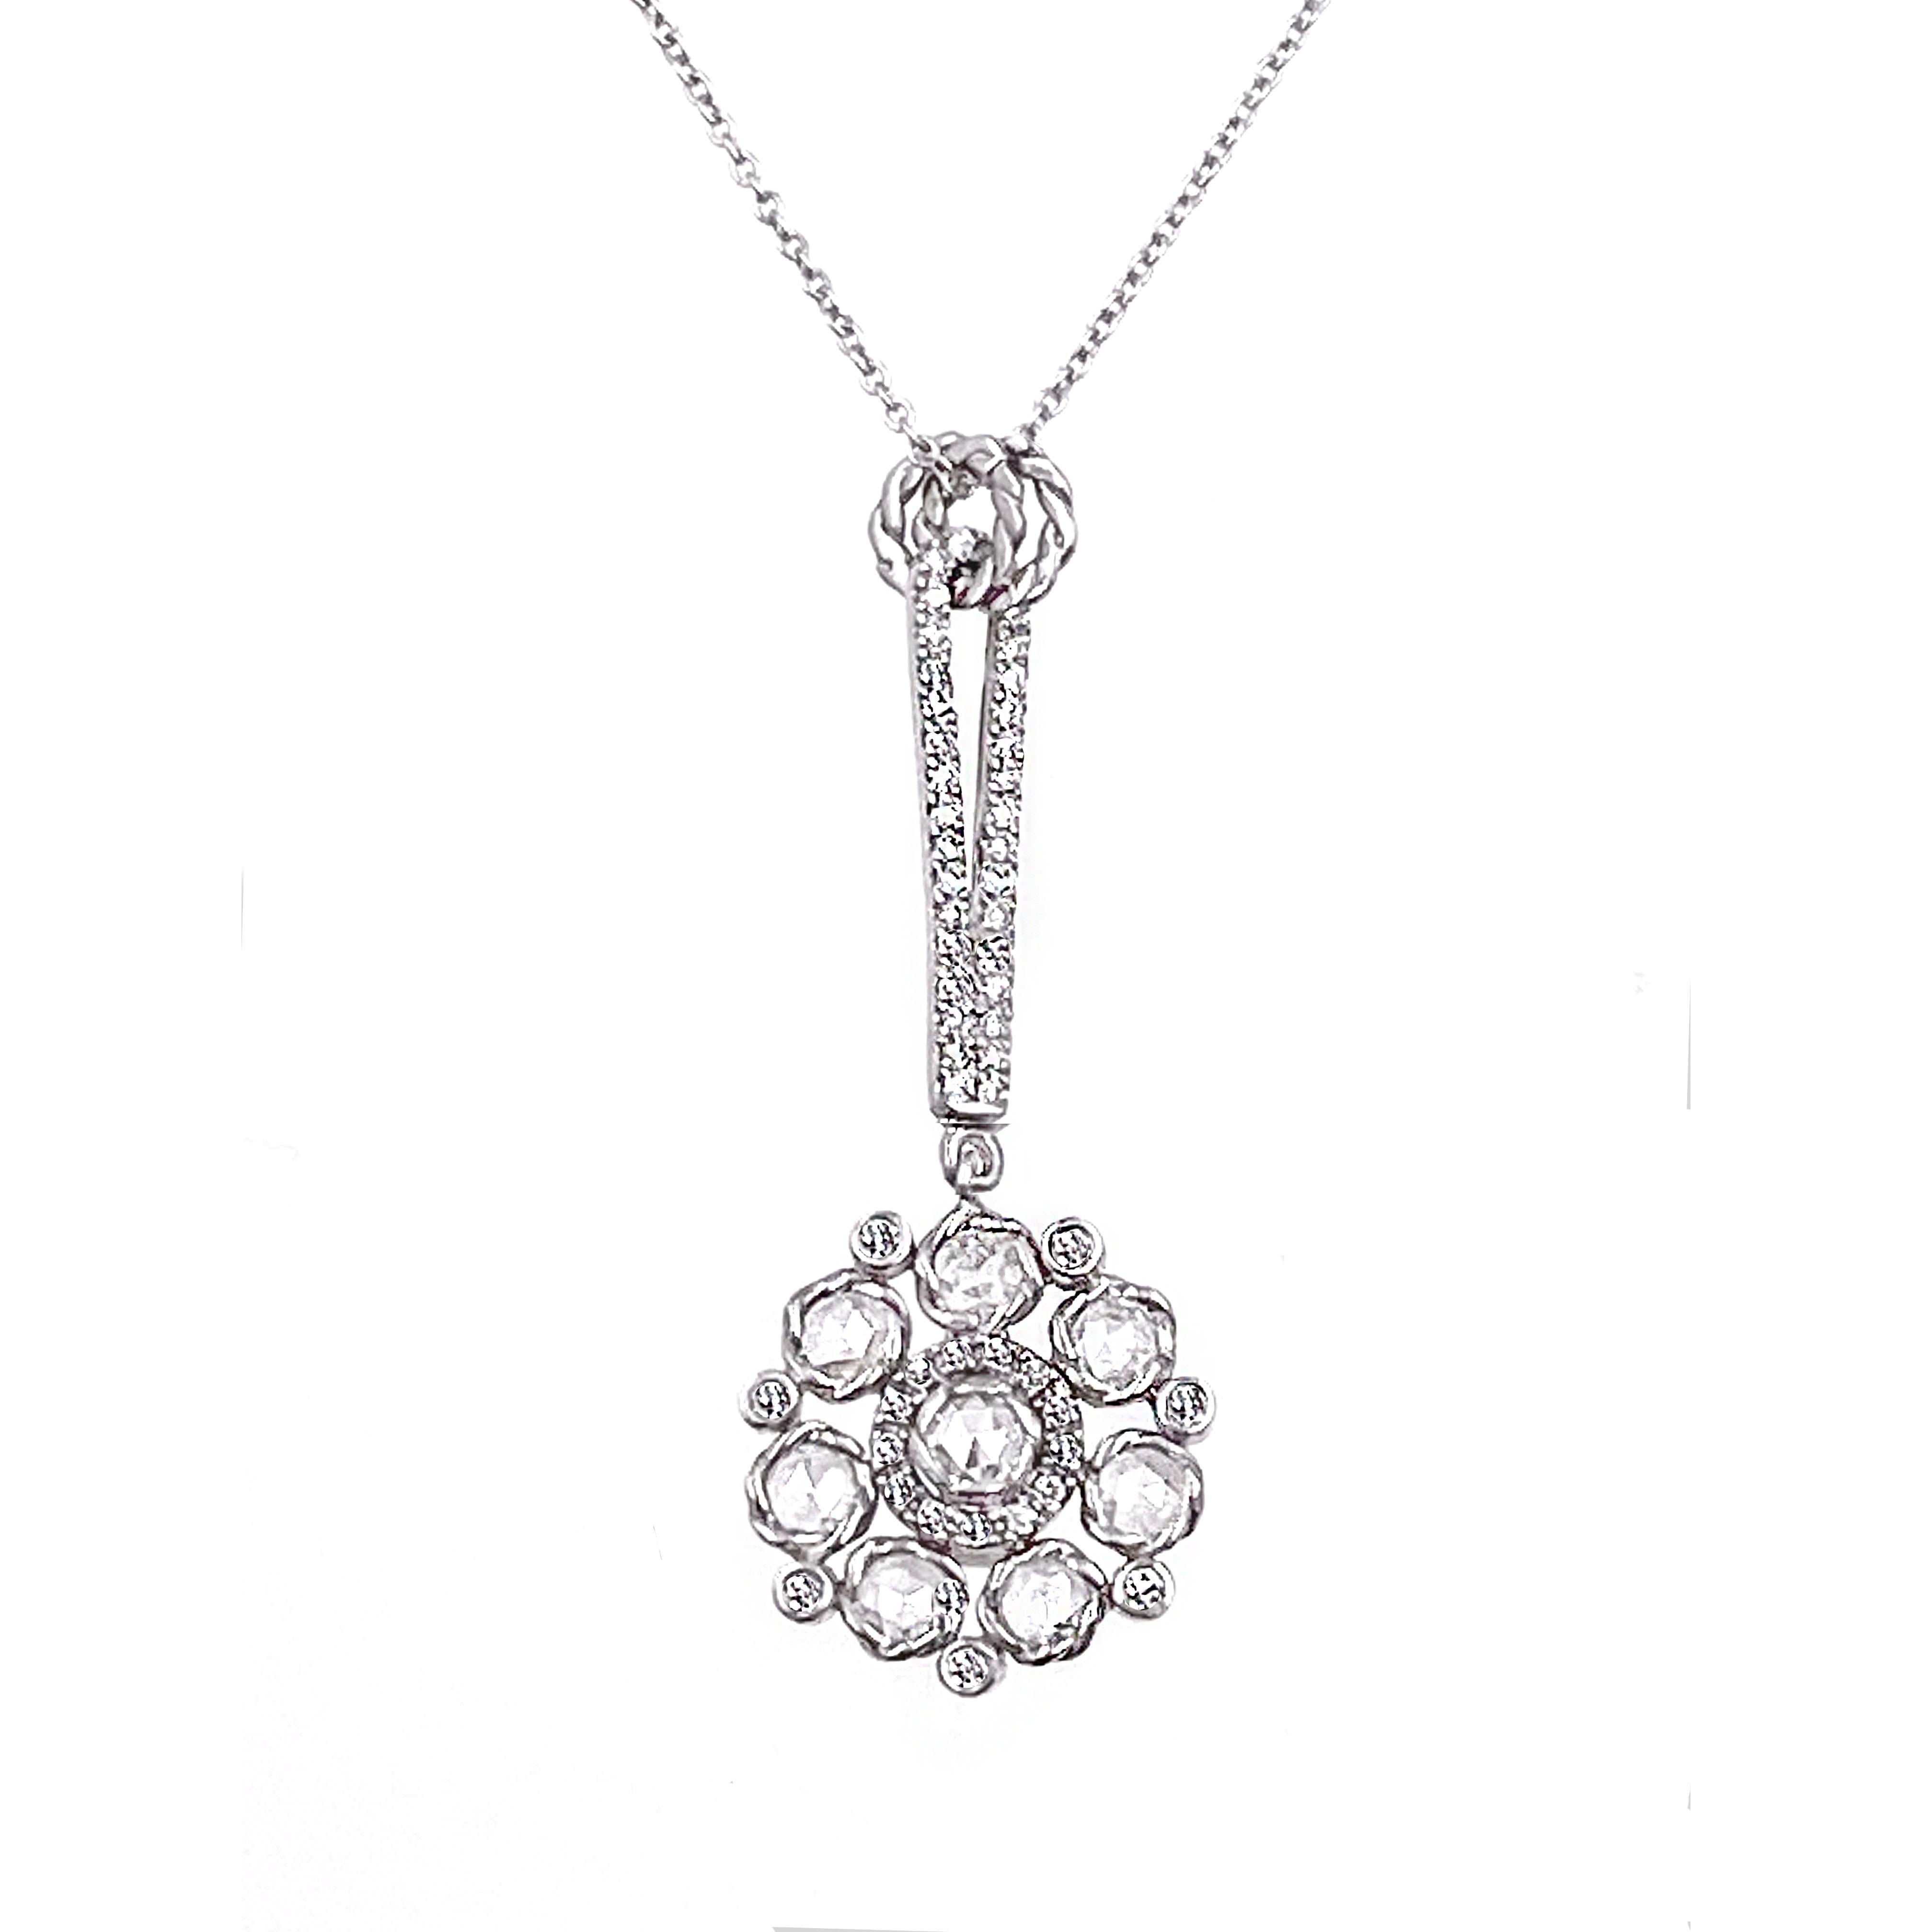 PERSEPHONE rose-cut diamond bouquet pendant necklace featuring a 15mm rose cut diamond bouquet, that has 8 rose cut diamond wrapped in our signature twist bezels and complemented by micro pavé diamond inner halo and 7 small bezel set diamonds. The